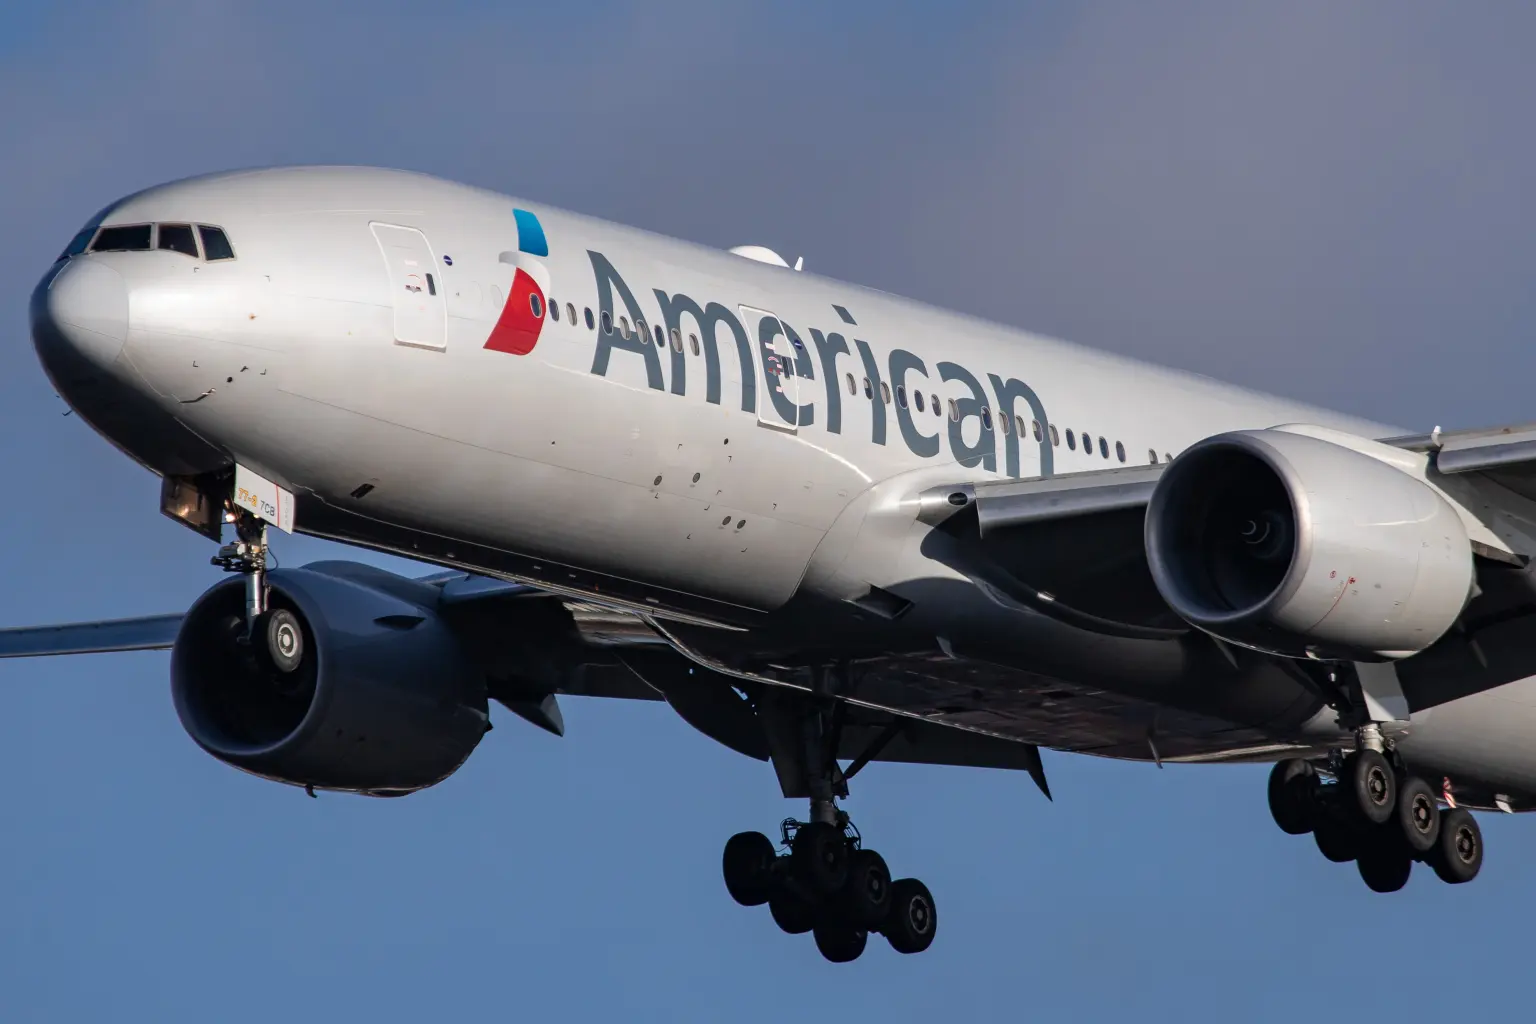 American Airlines Places Employees on Leave After Racial Discrimination Lawsuit